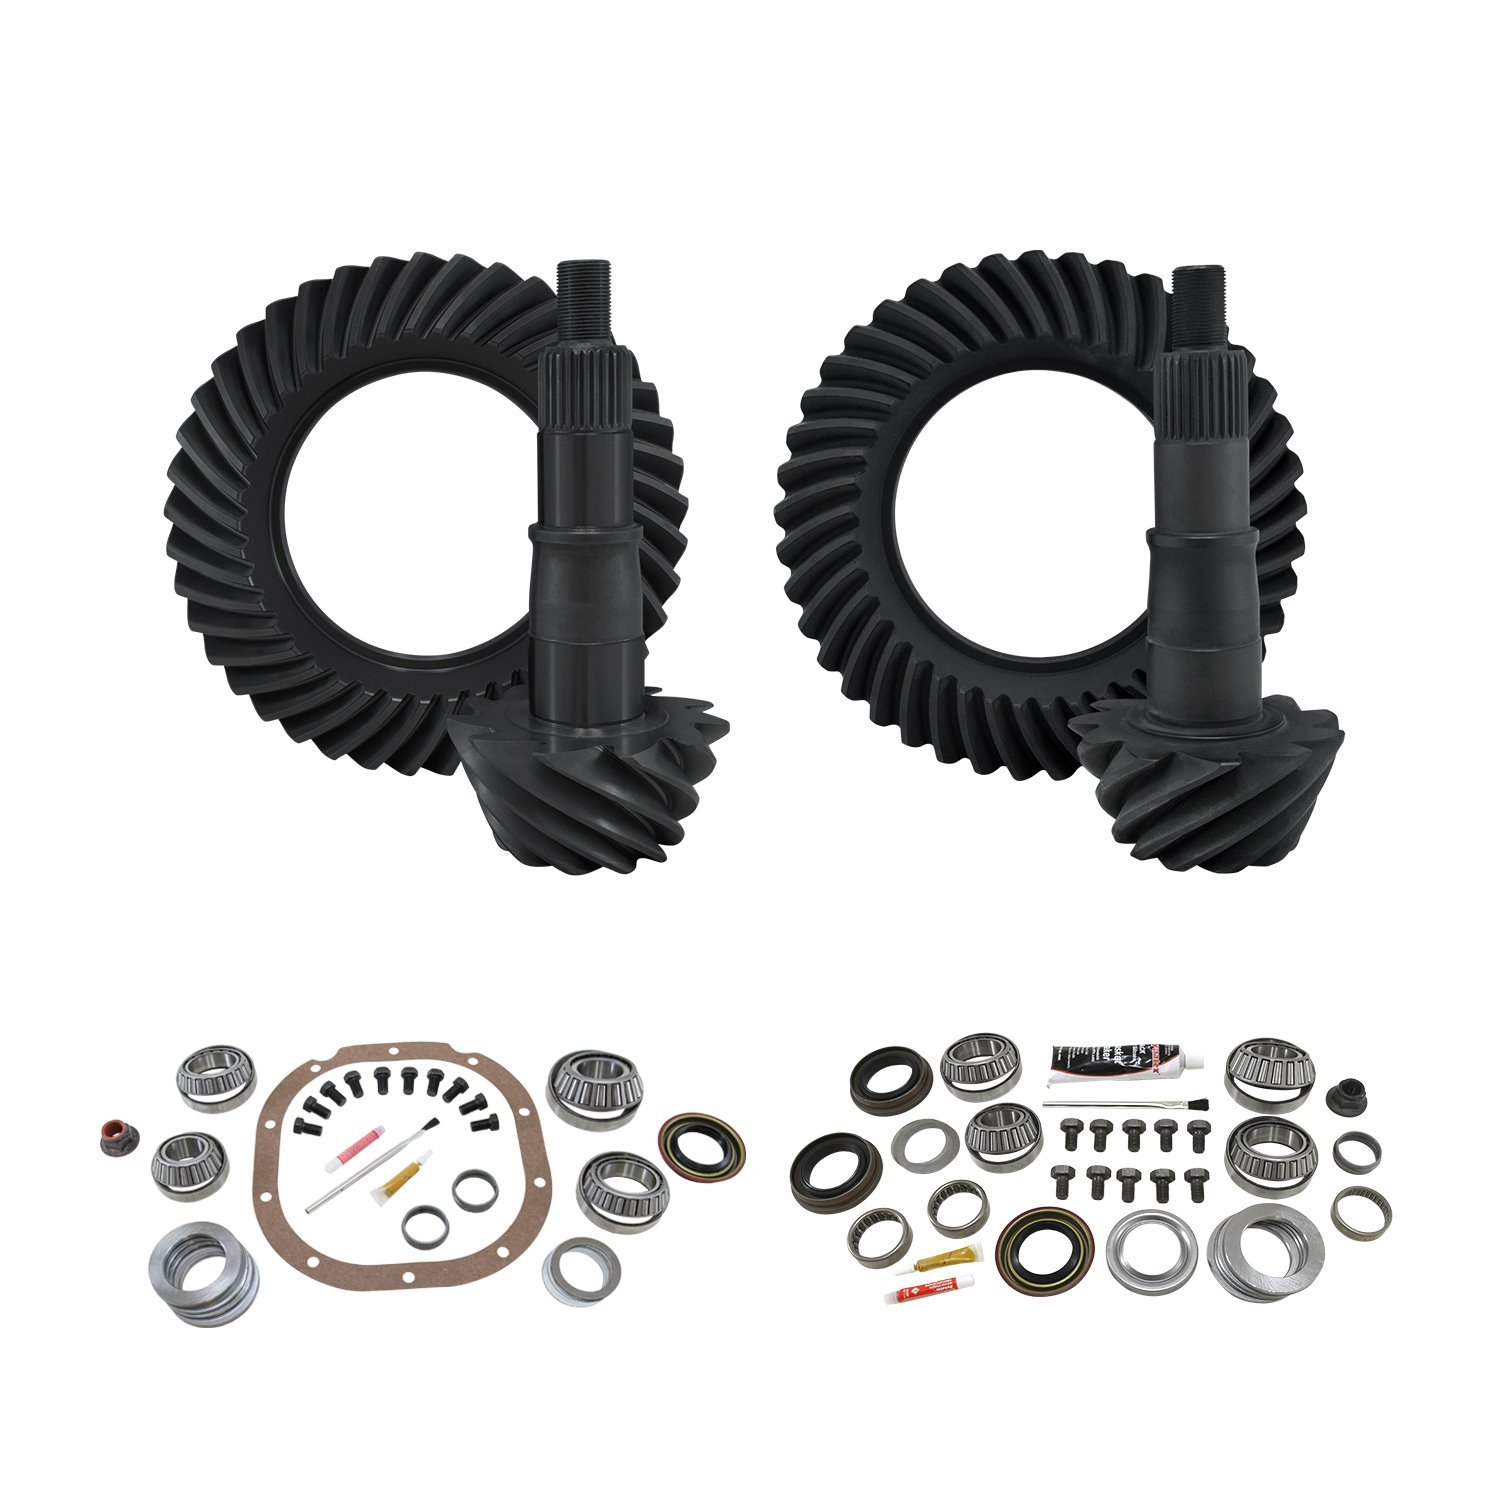 Re-Gear & Installation Kit, Ford 8.8 in., Various F150, 3.73 Ratio, Fr&Rr